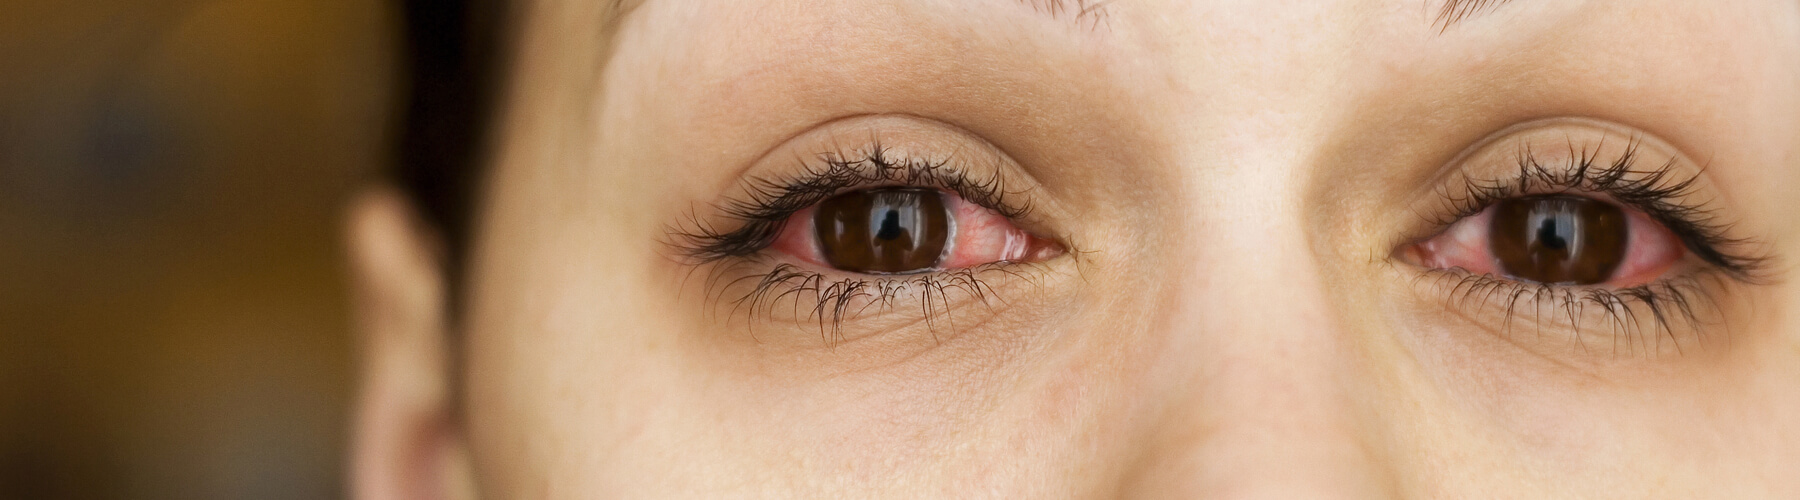 female eyes with conjunctivitis or pink eye